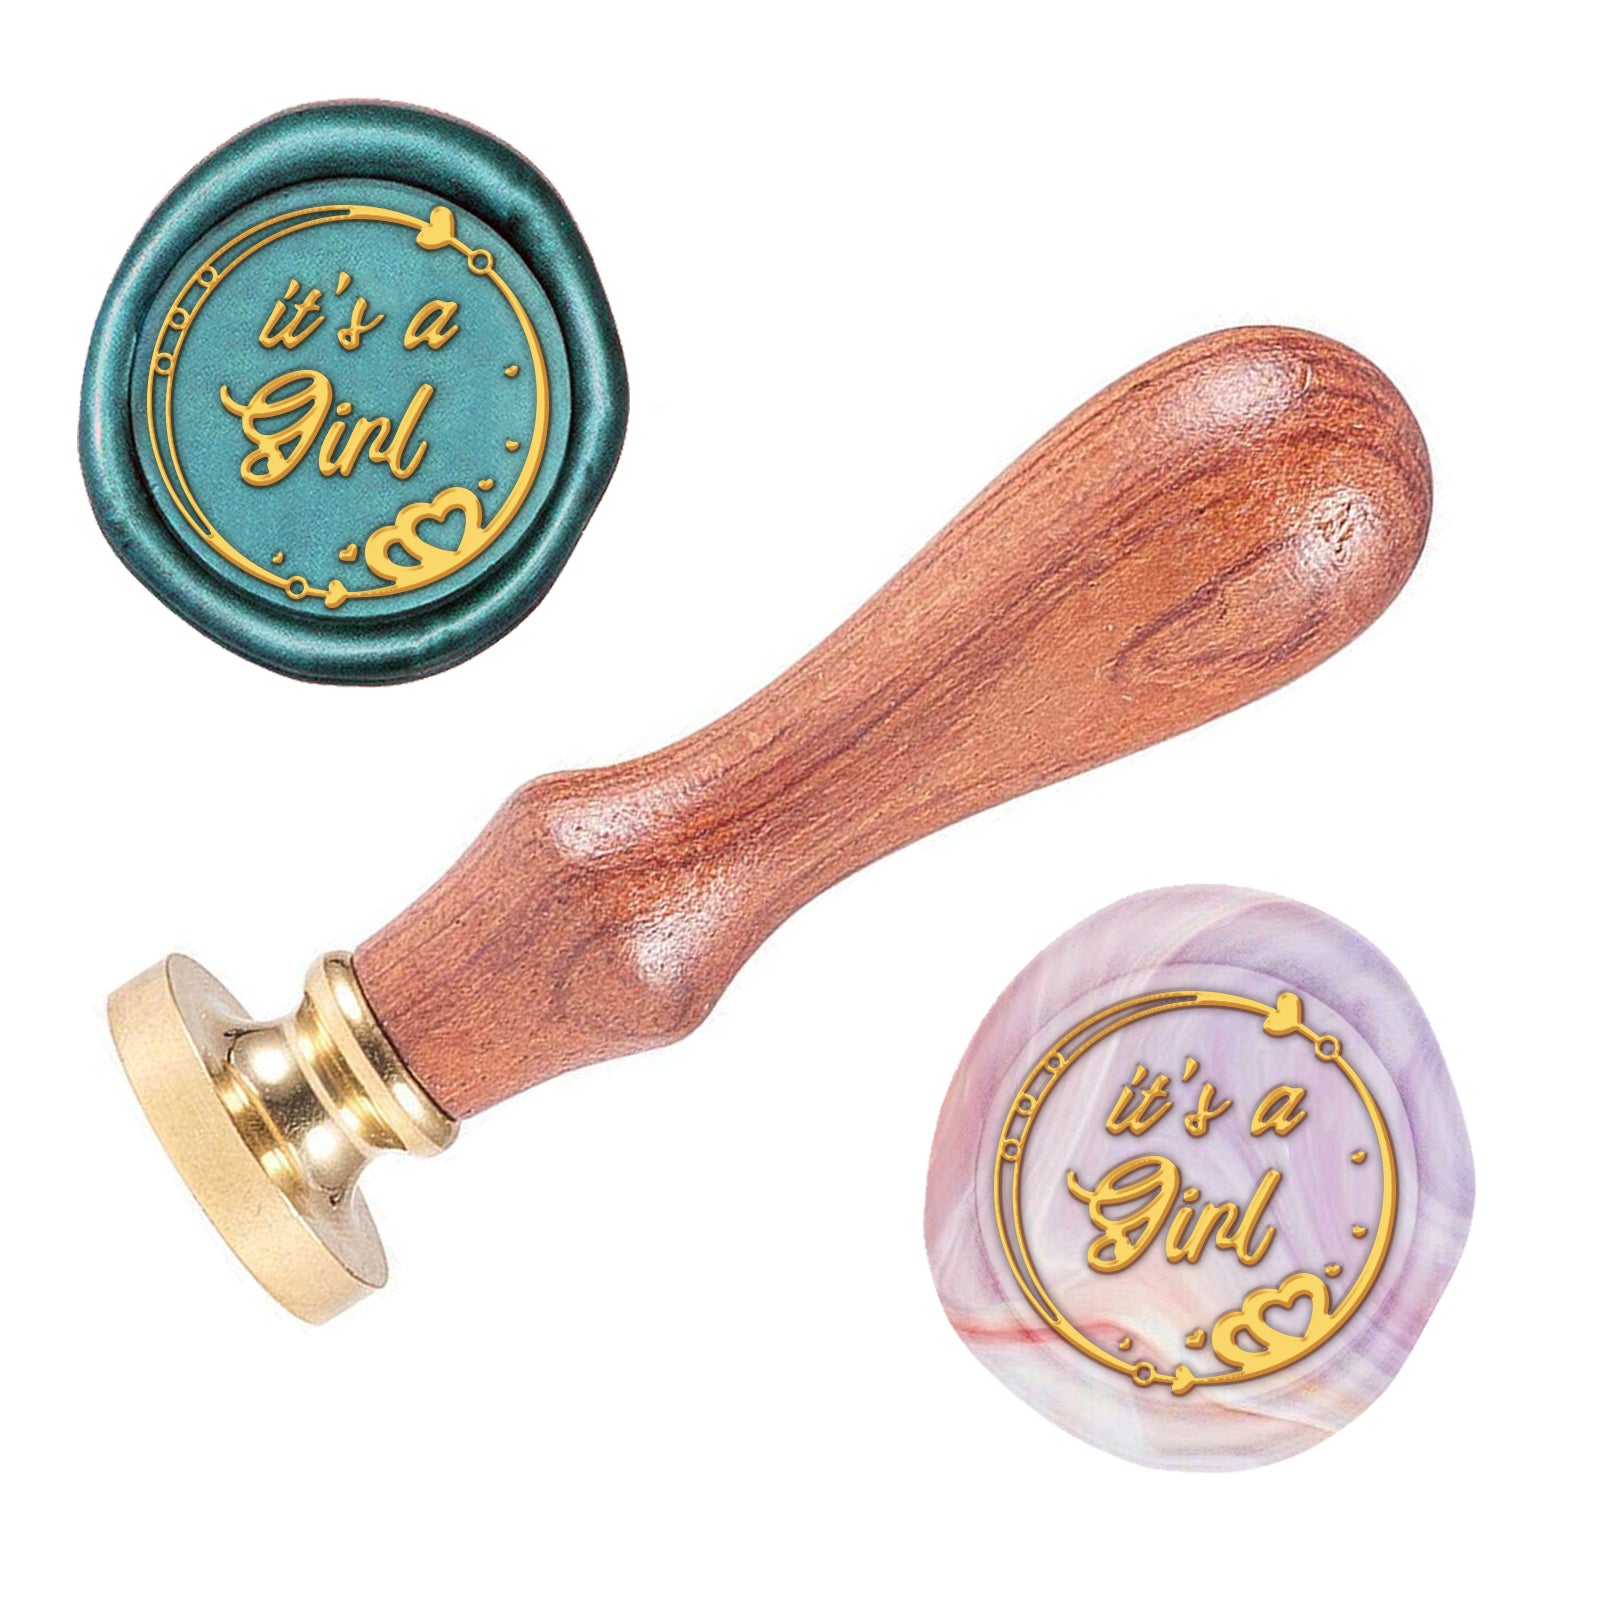 It's a girl Wood Handle Wax Seal Stamp